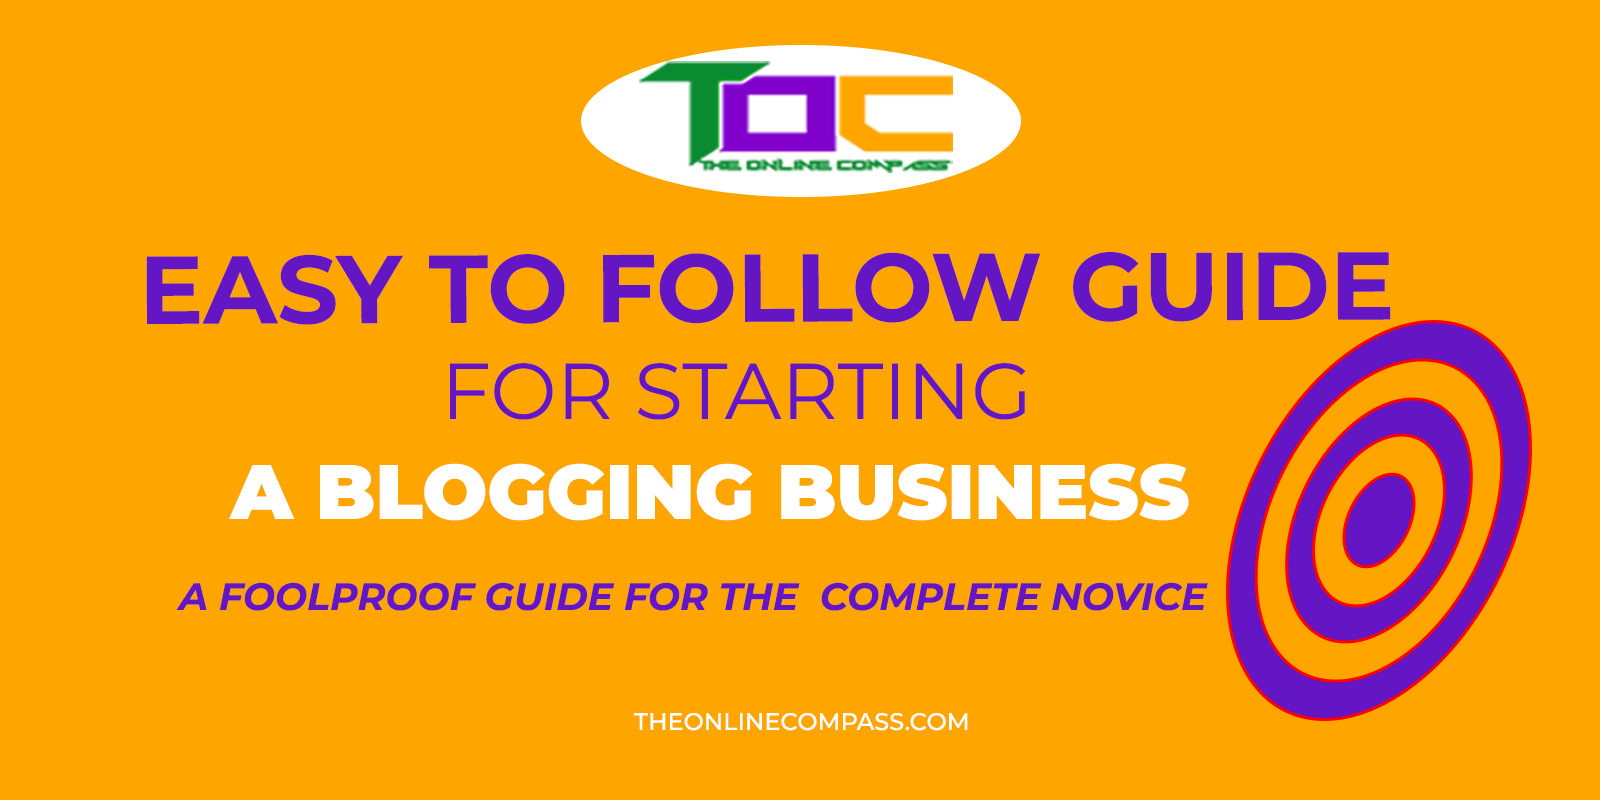 A fool proof guide for starting a business blog